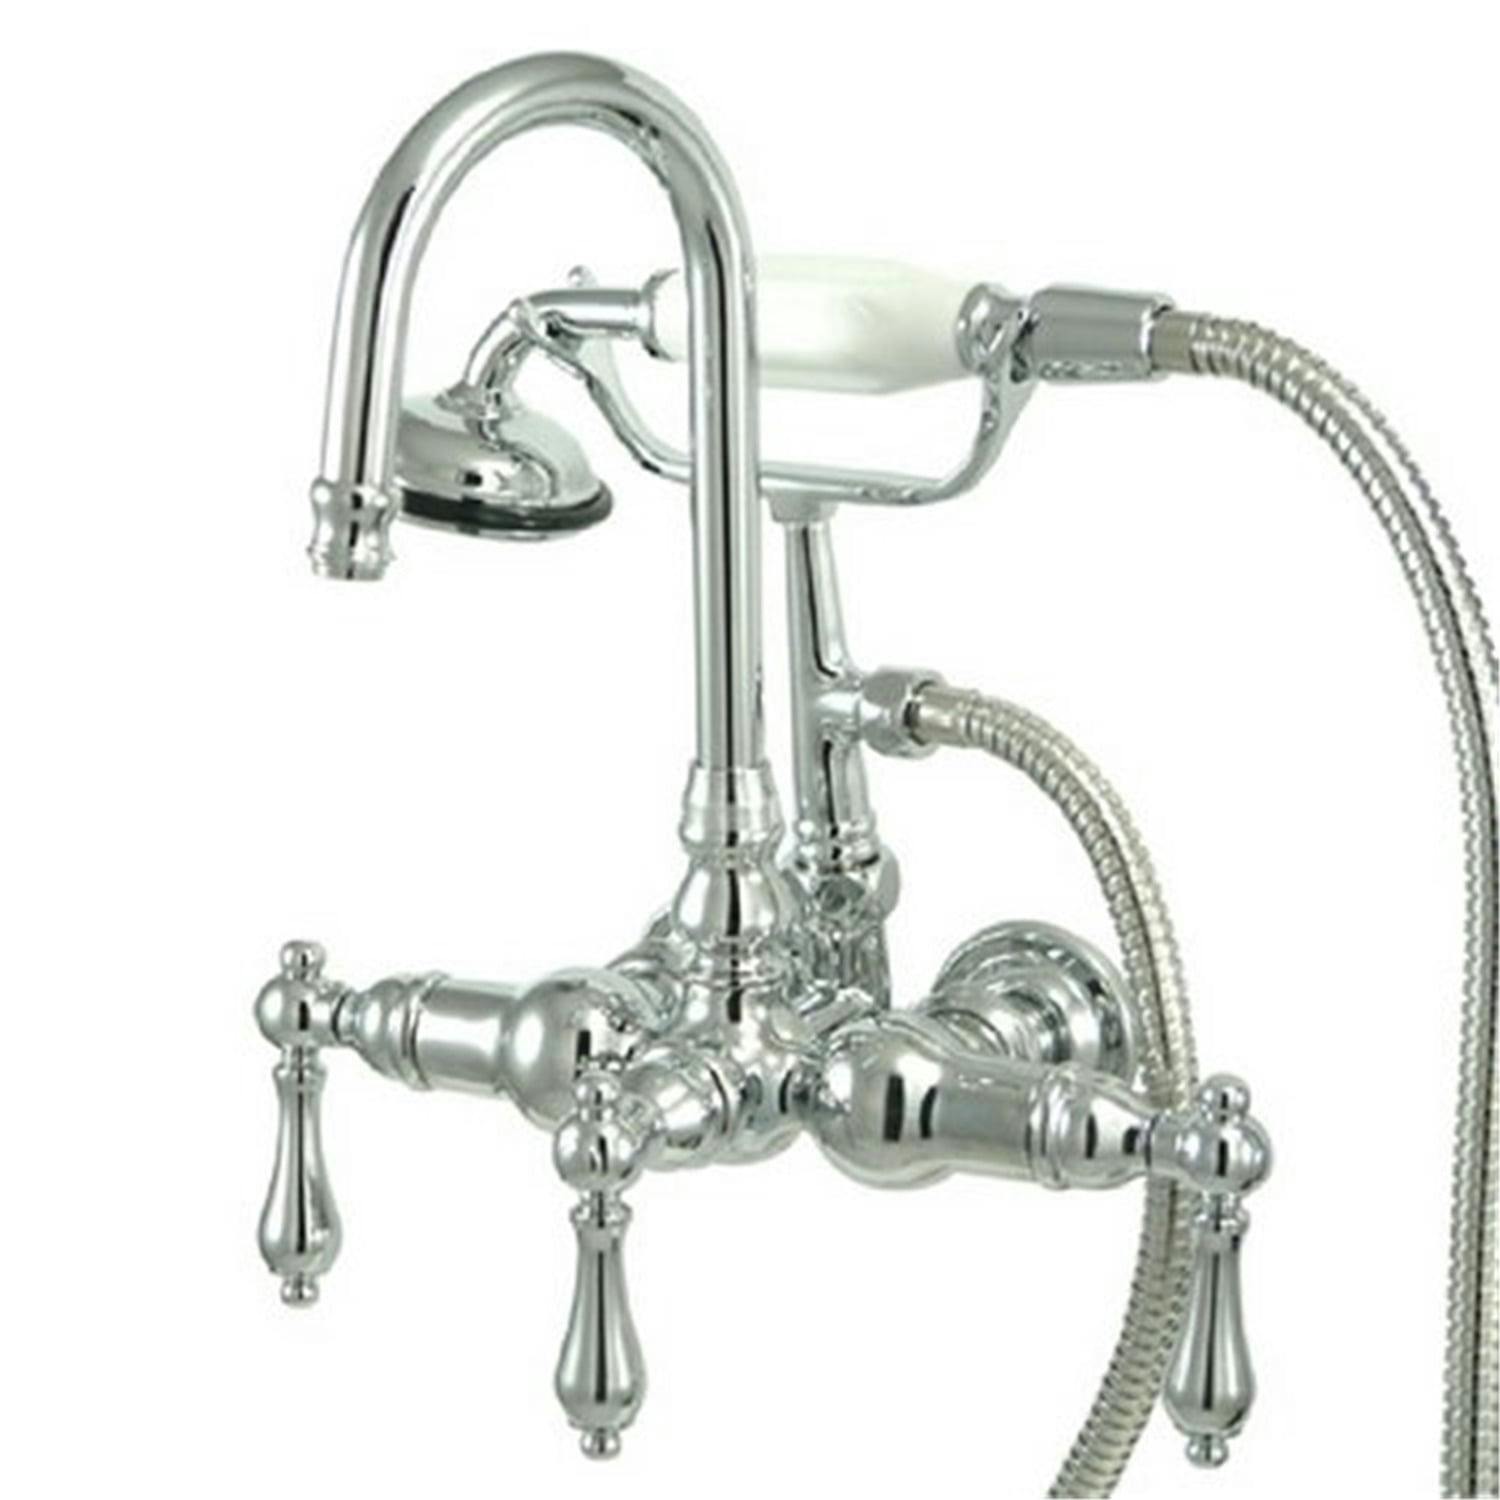 Vintage Polished Chrome Clawfoot Tub Faucet with Hand Shower